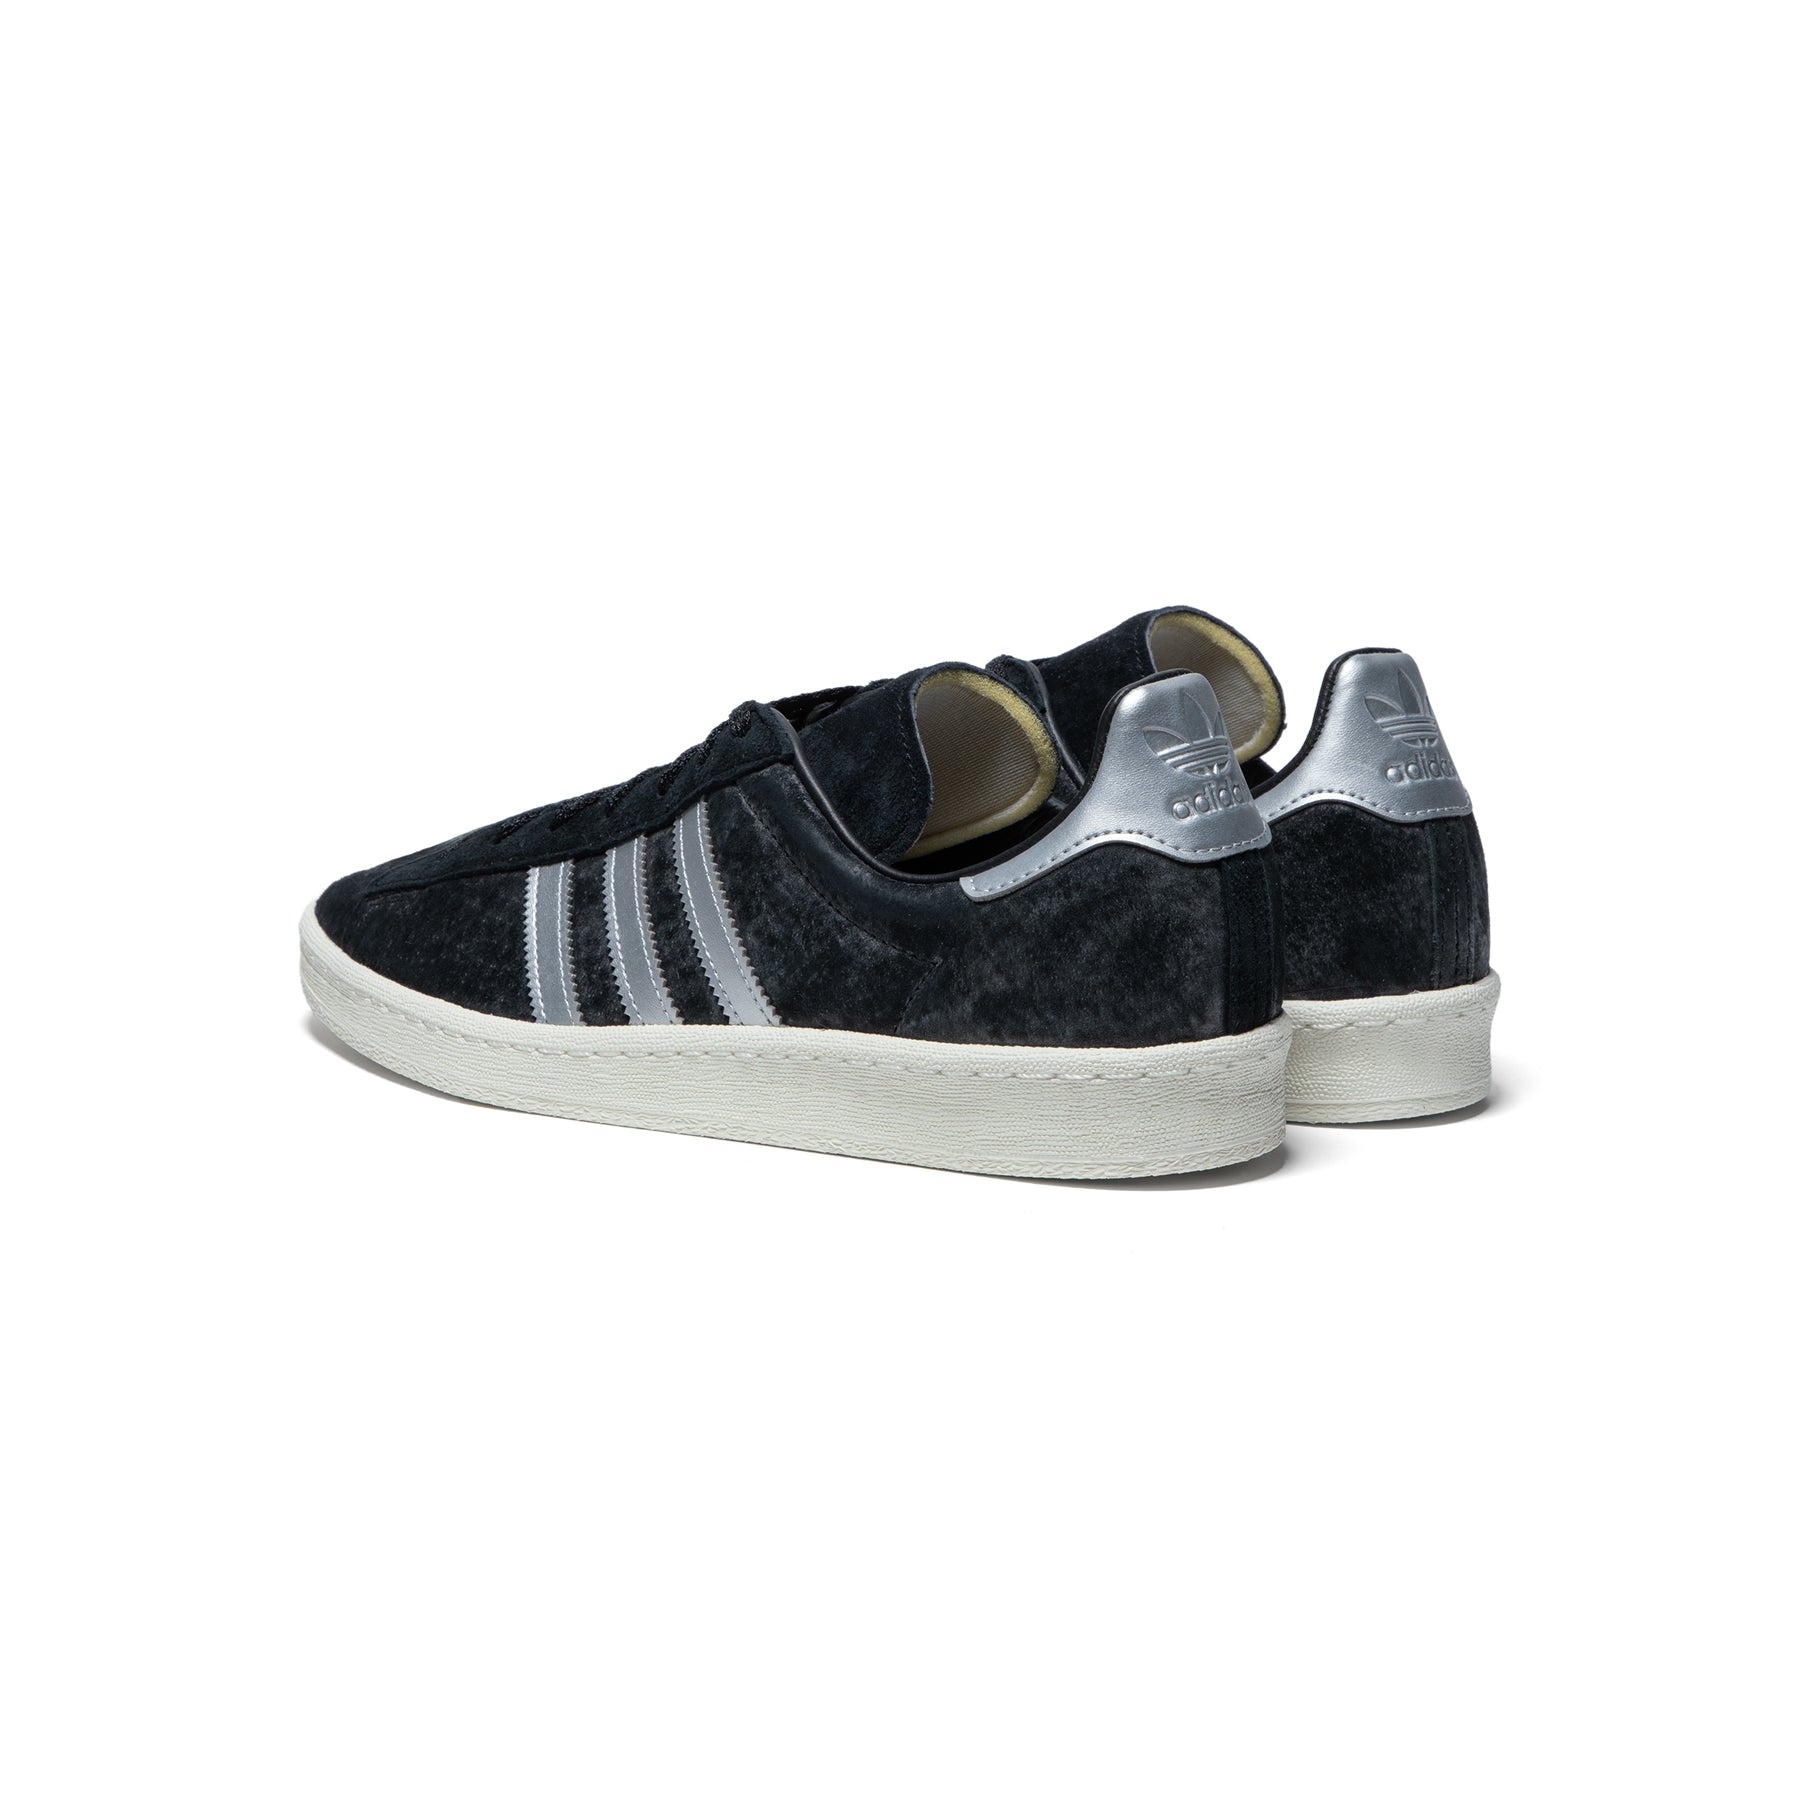 Adidas Campus 80s (Core Black/Feather White/Off –